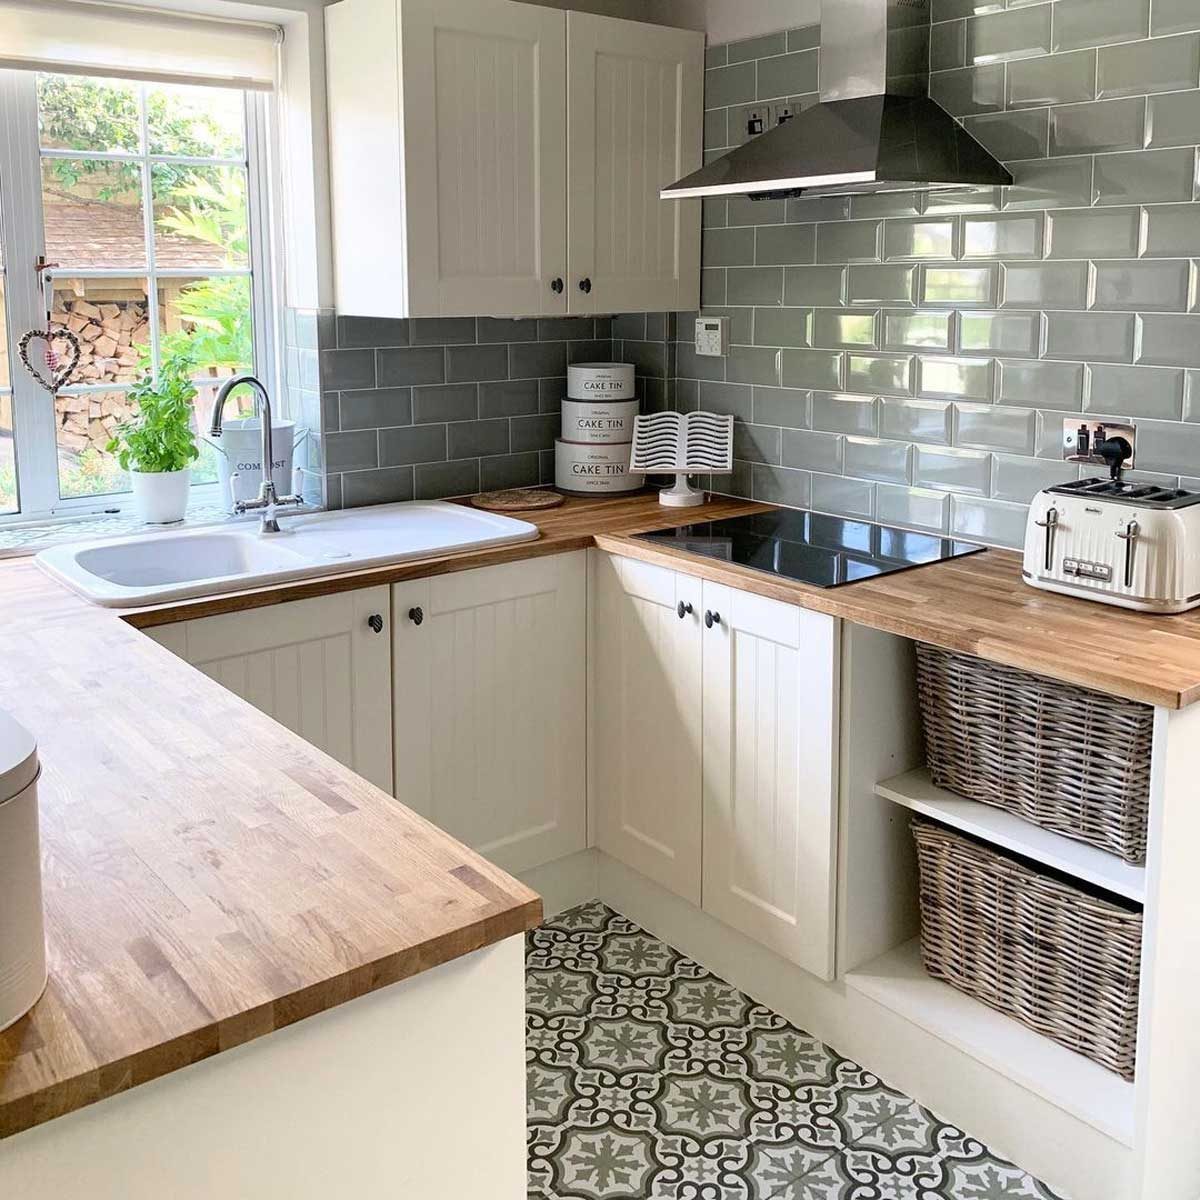 Kitchen with patterned floor tiles